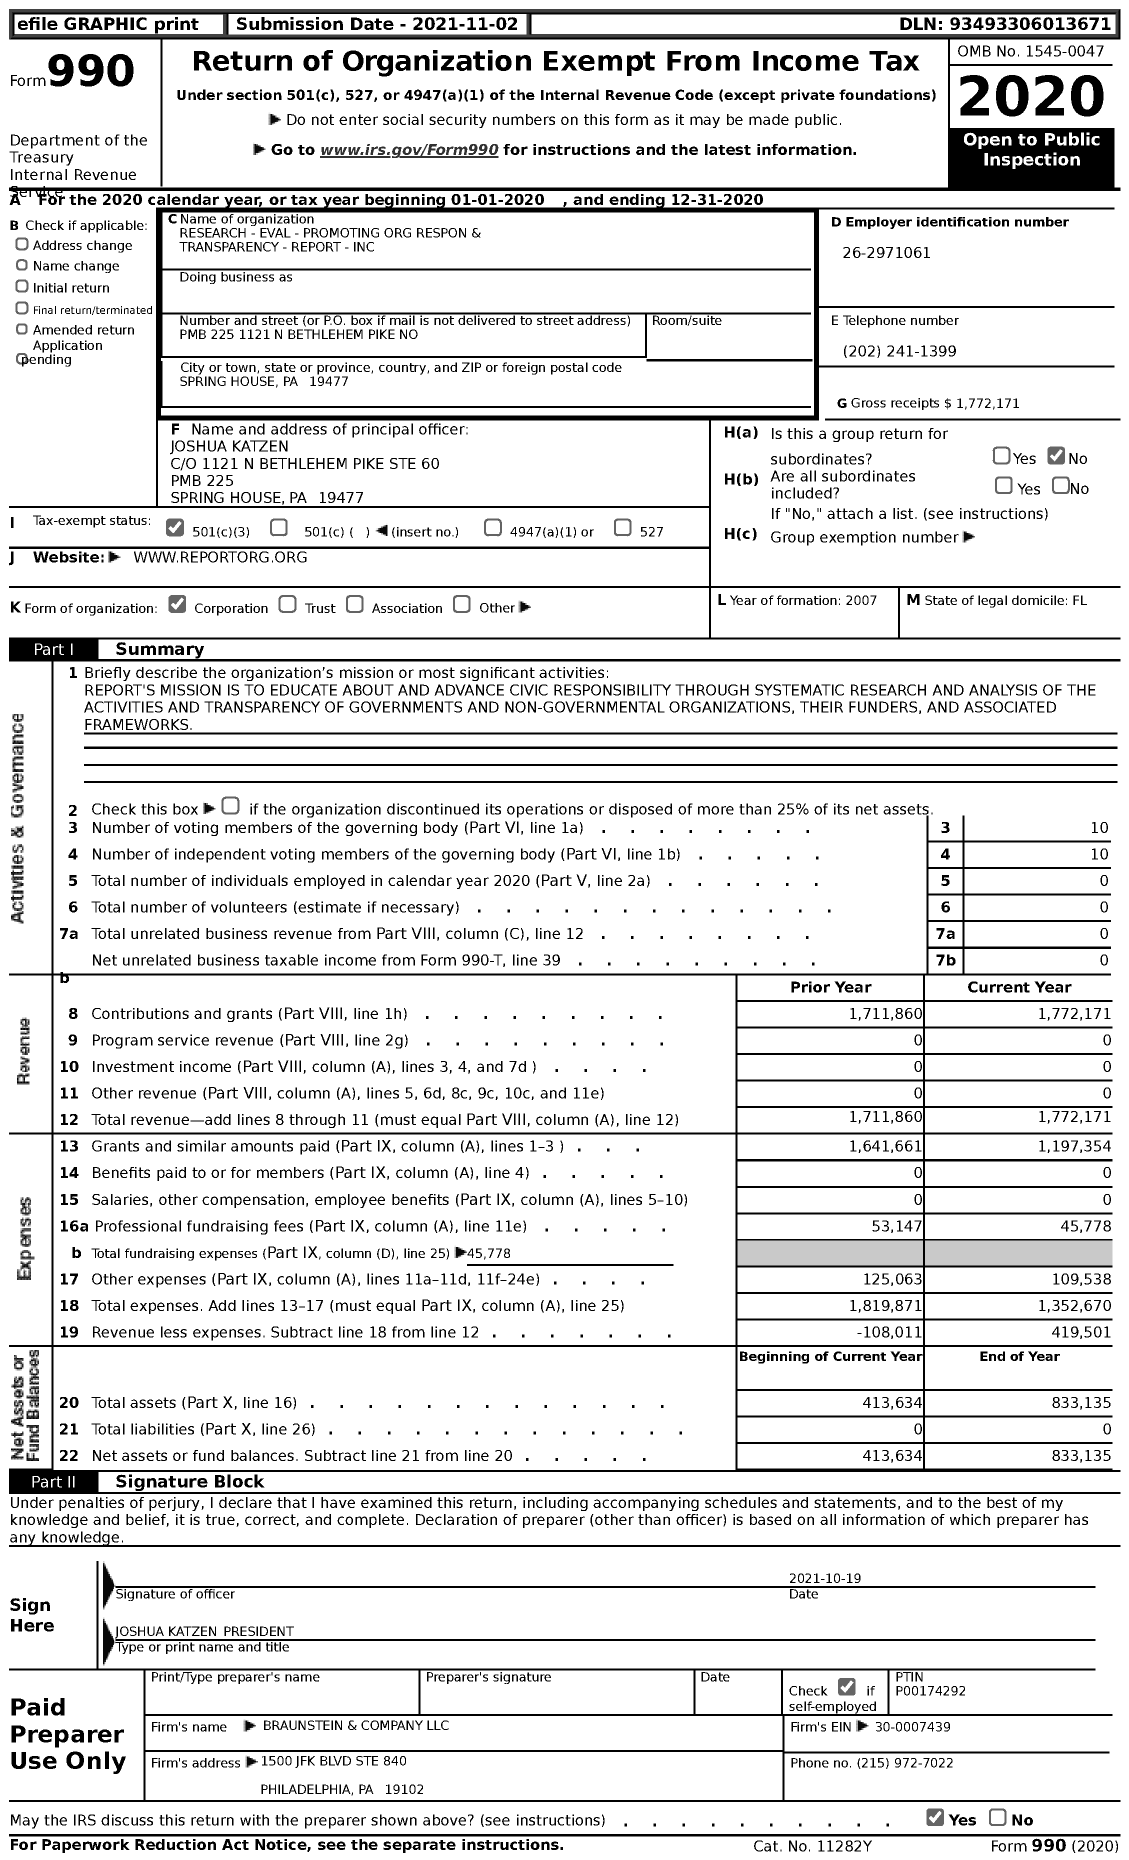 Image of first page of 2020 Form 990 for Research - Eval - Promoting Org Respon and Transparency - Report